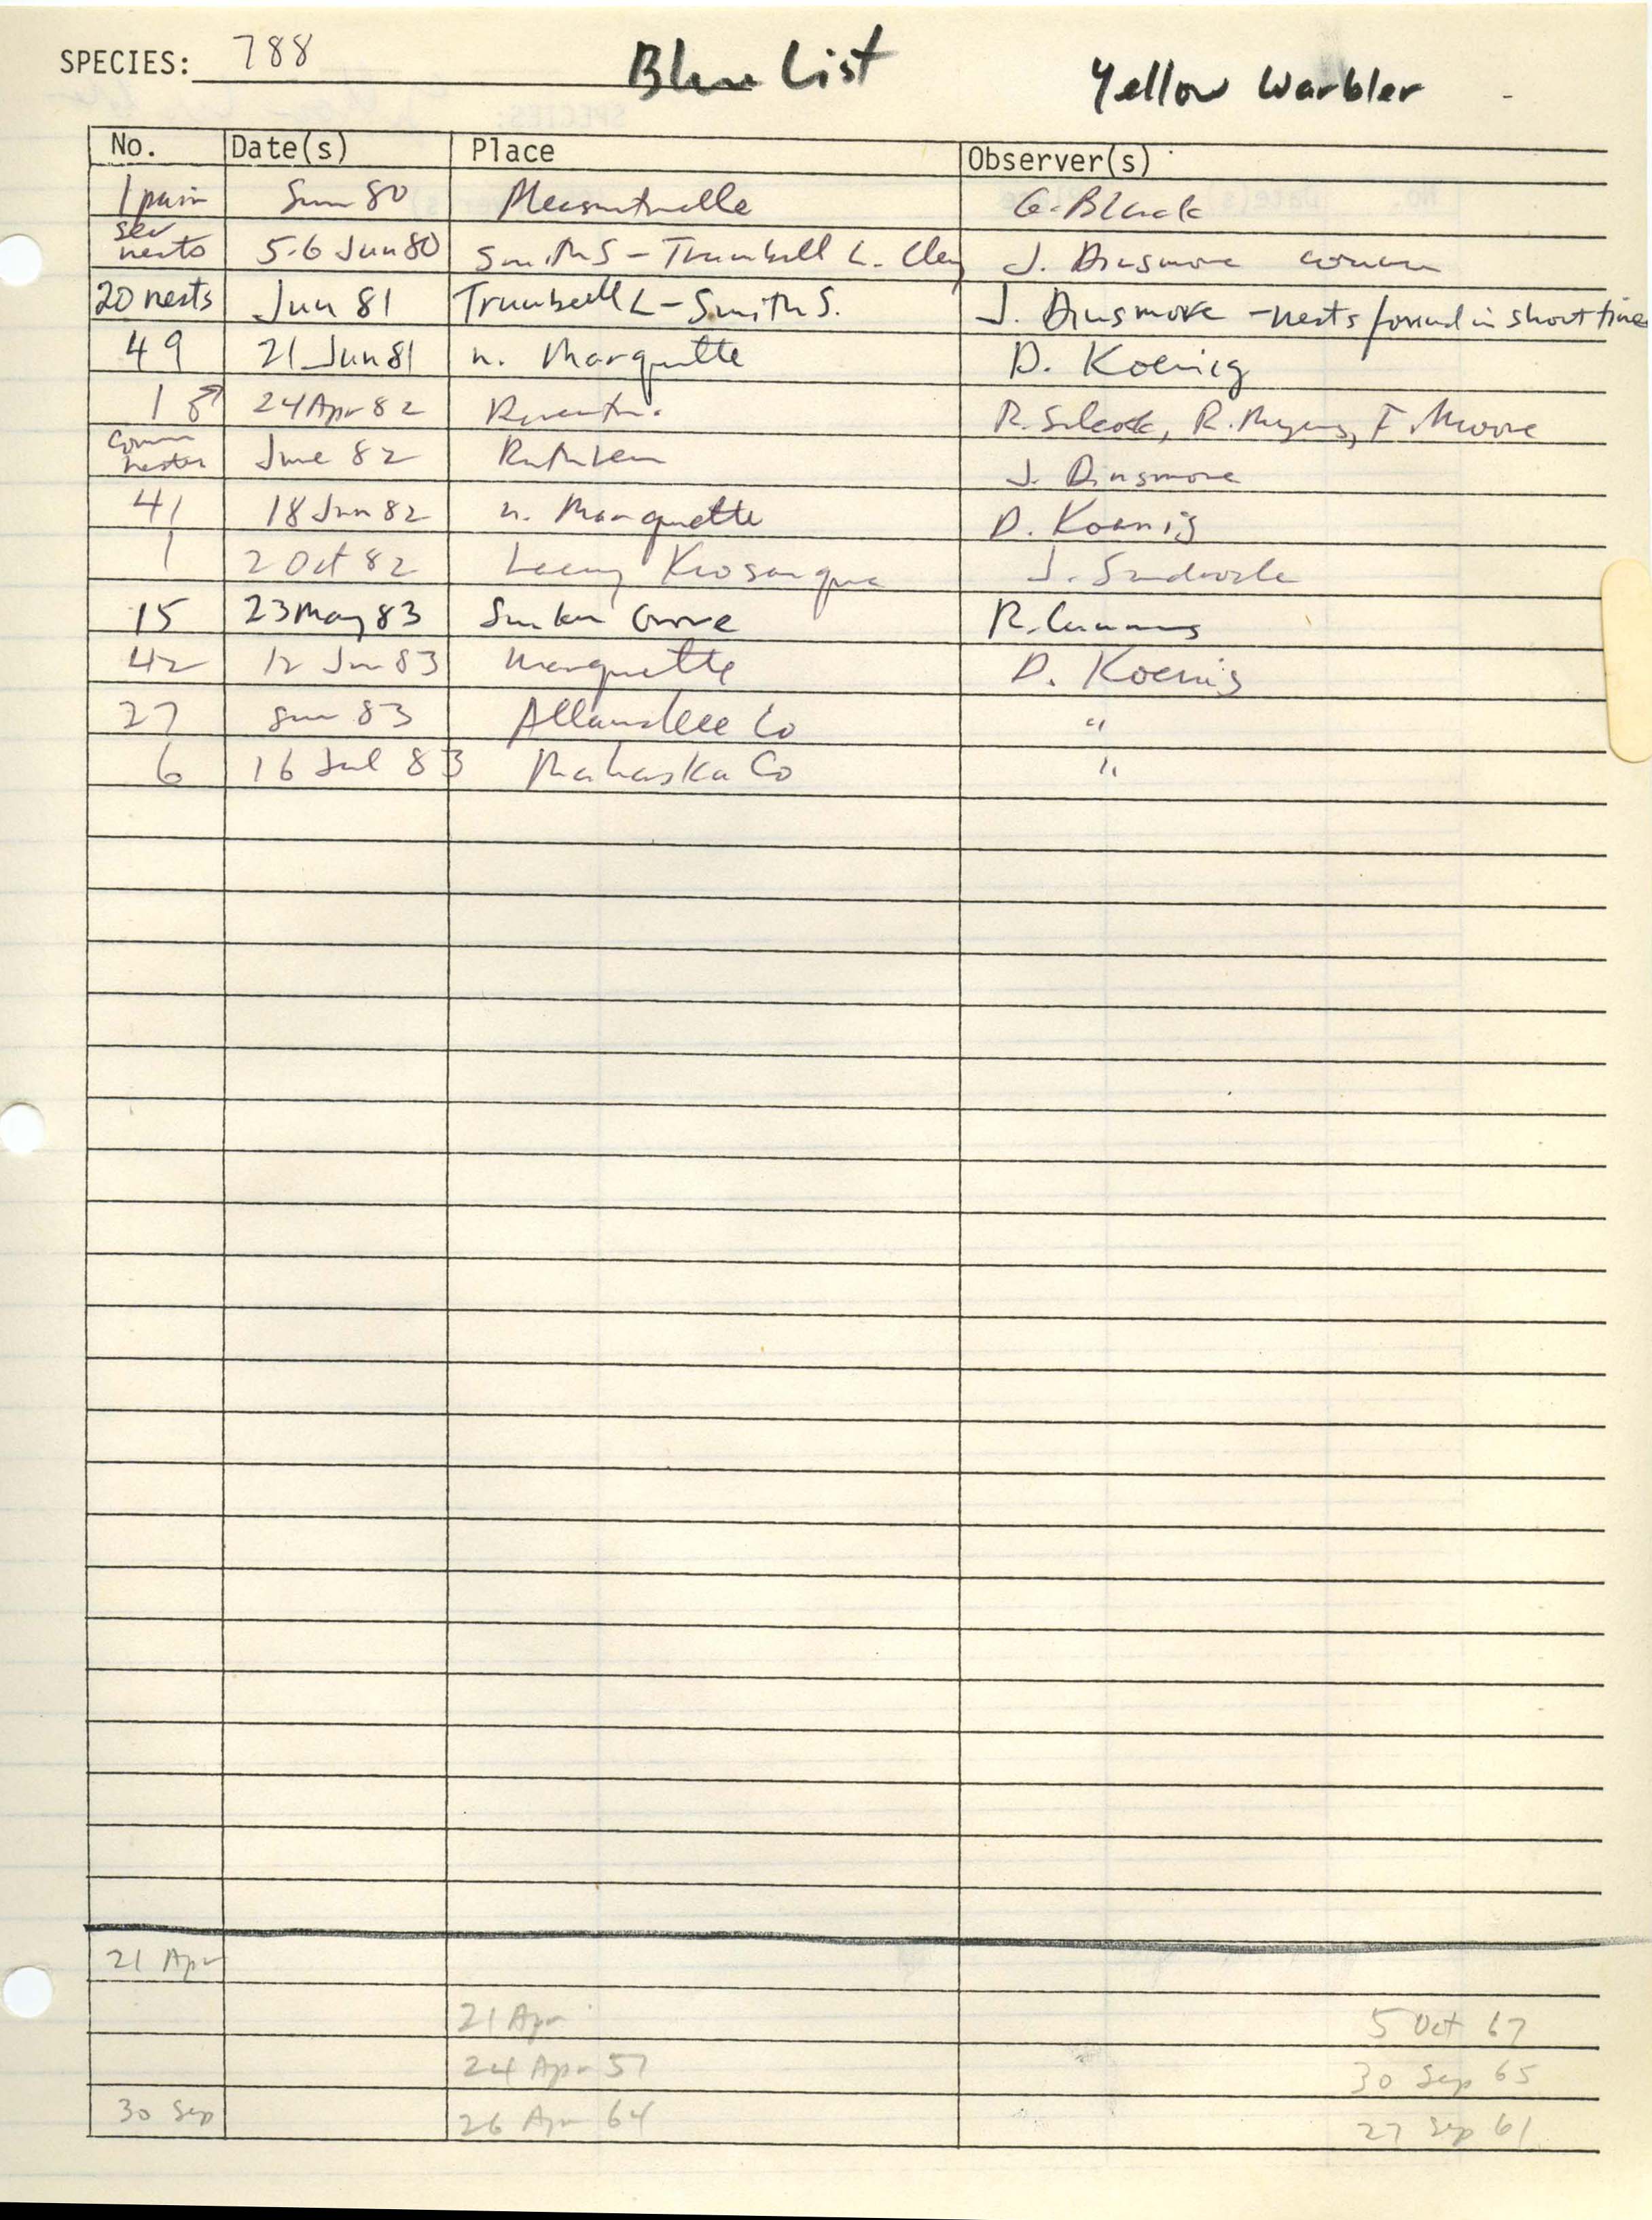 Iowa Ornithologists' Union, field report compiled data, Yellow Warbler, 1980-1983